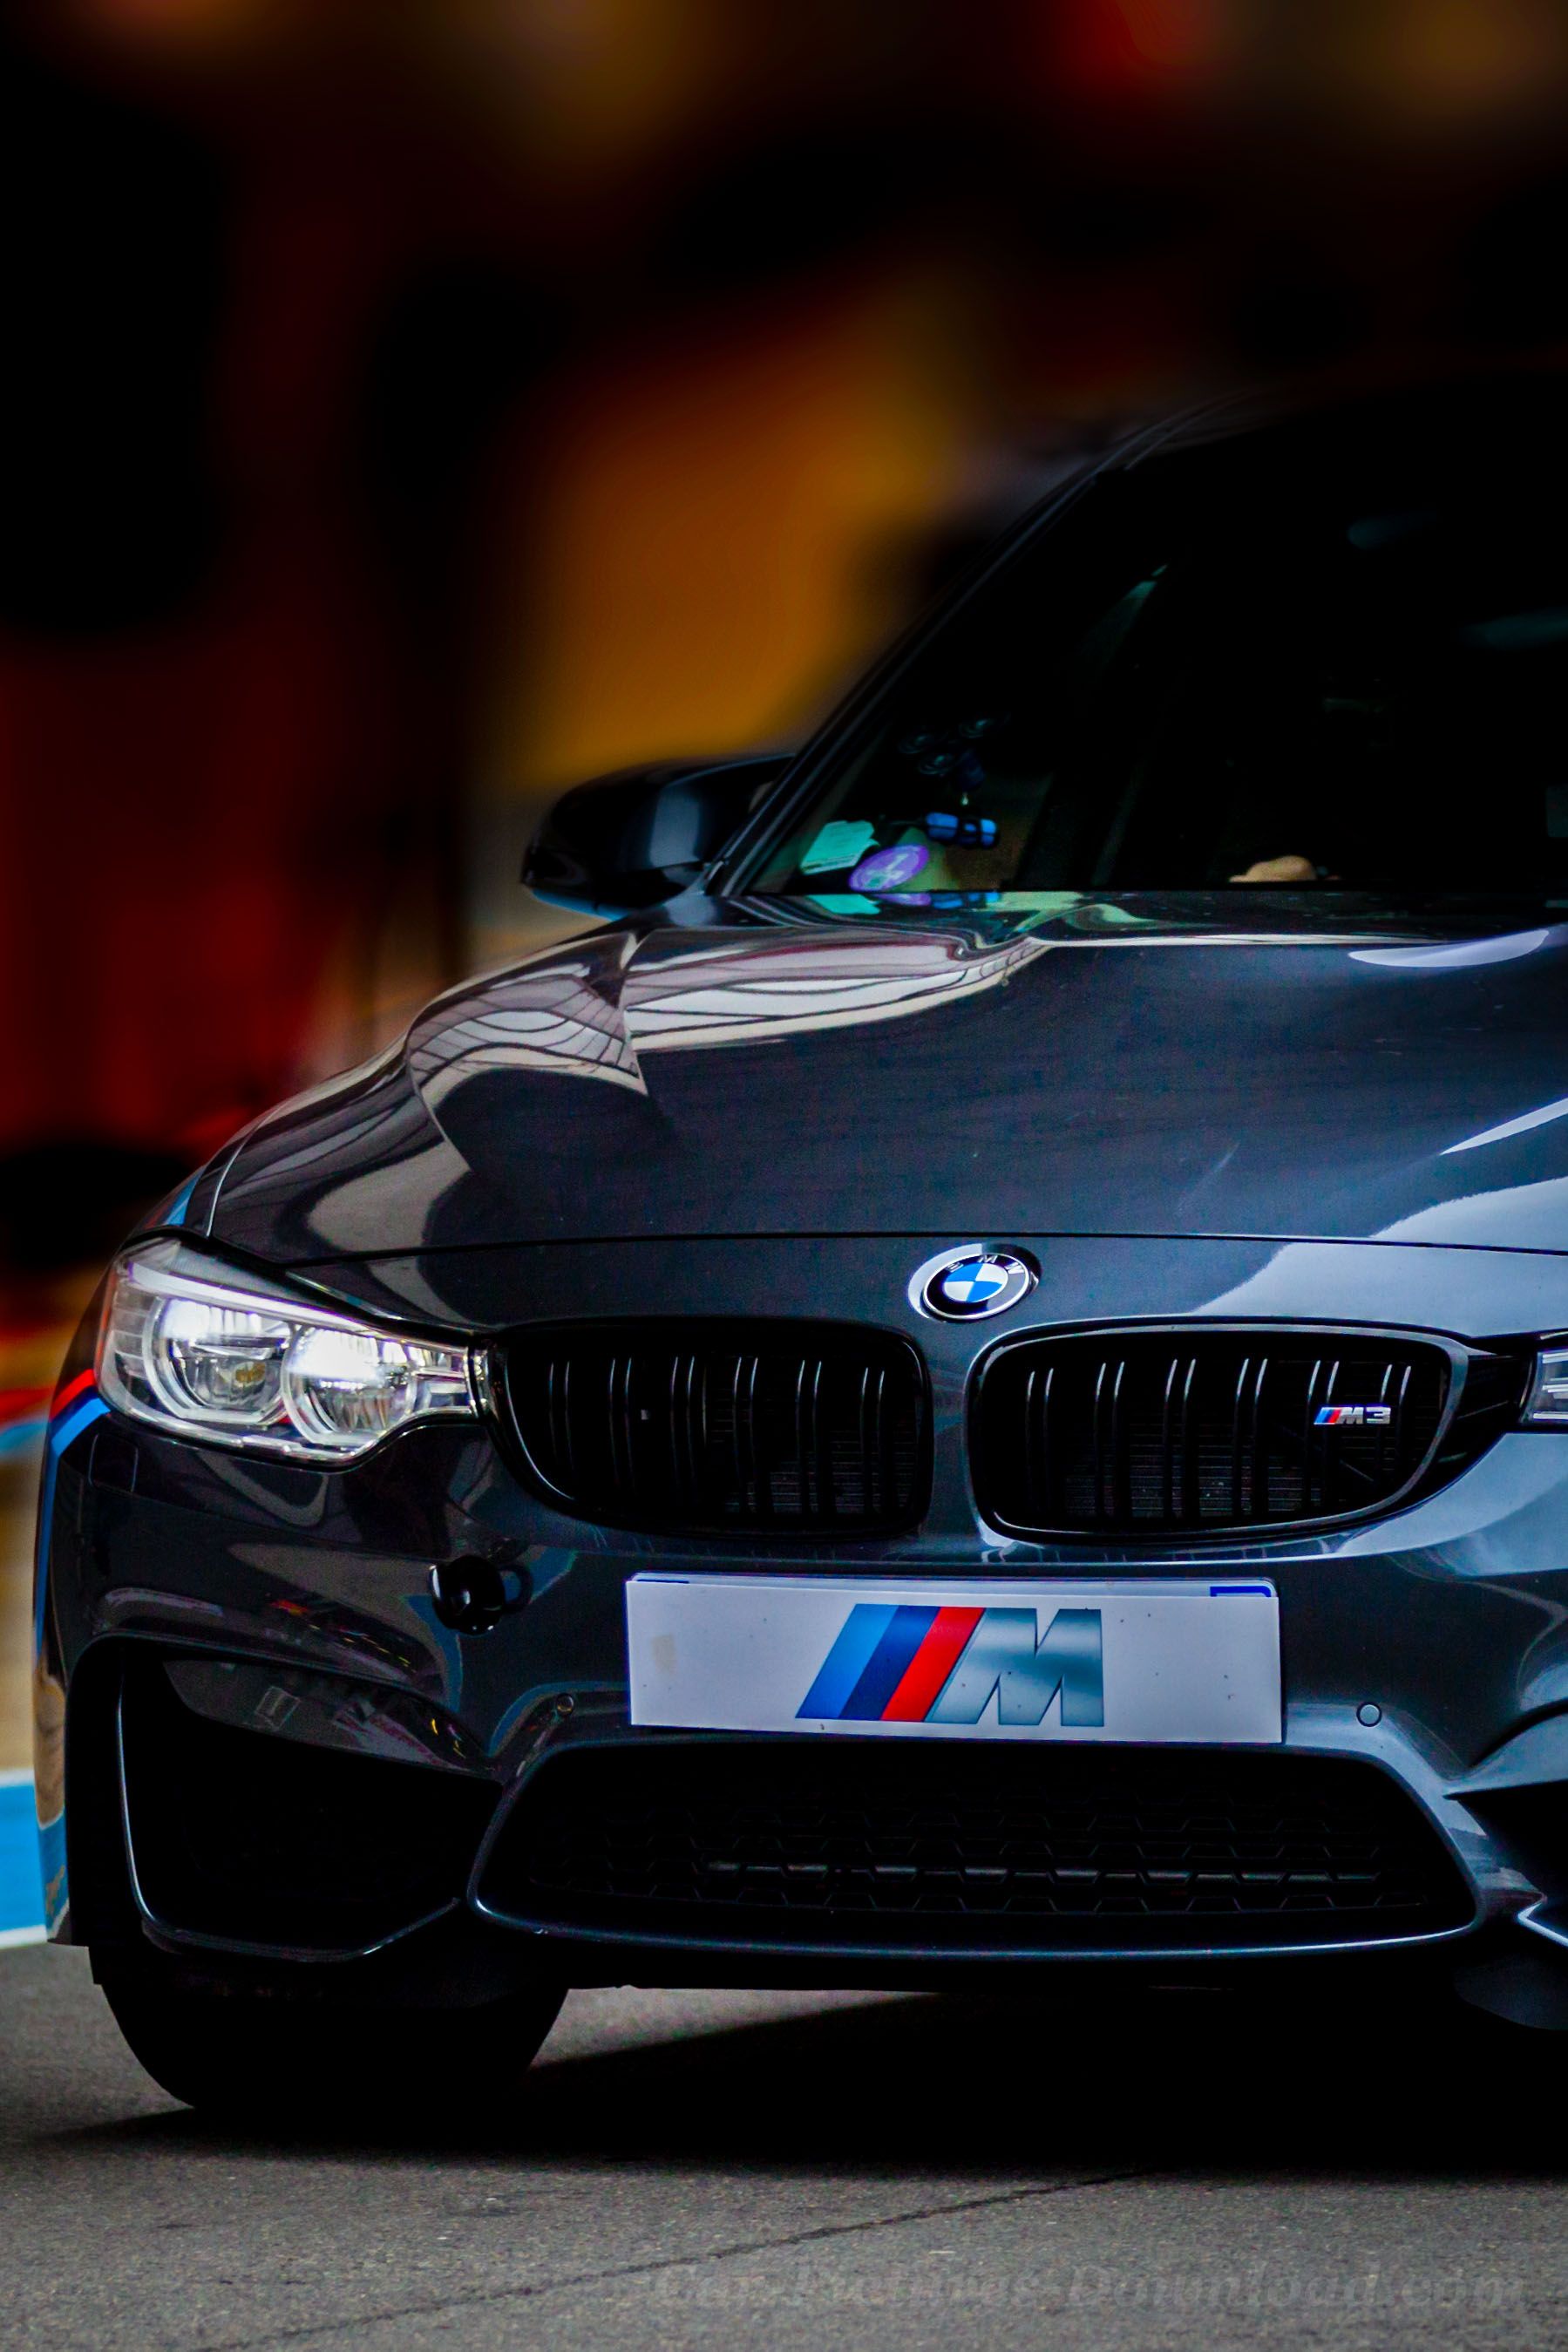 BMW M3 Wallpaper Picture All Devices HD Image Download